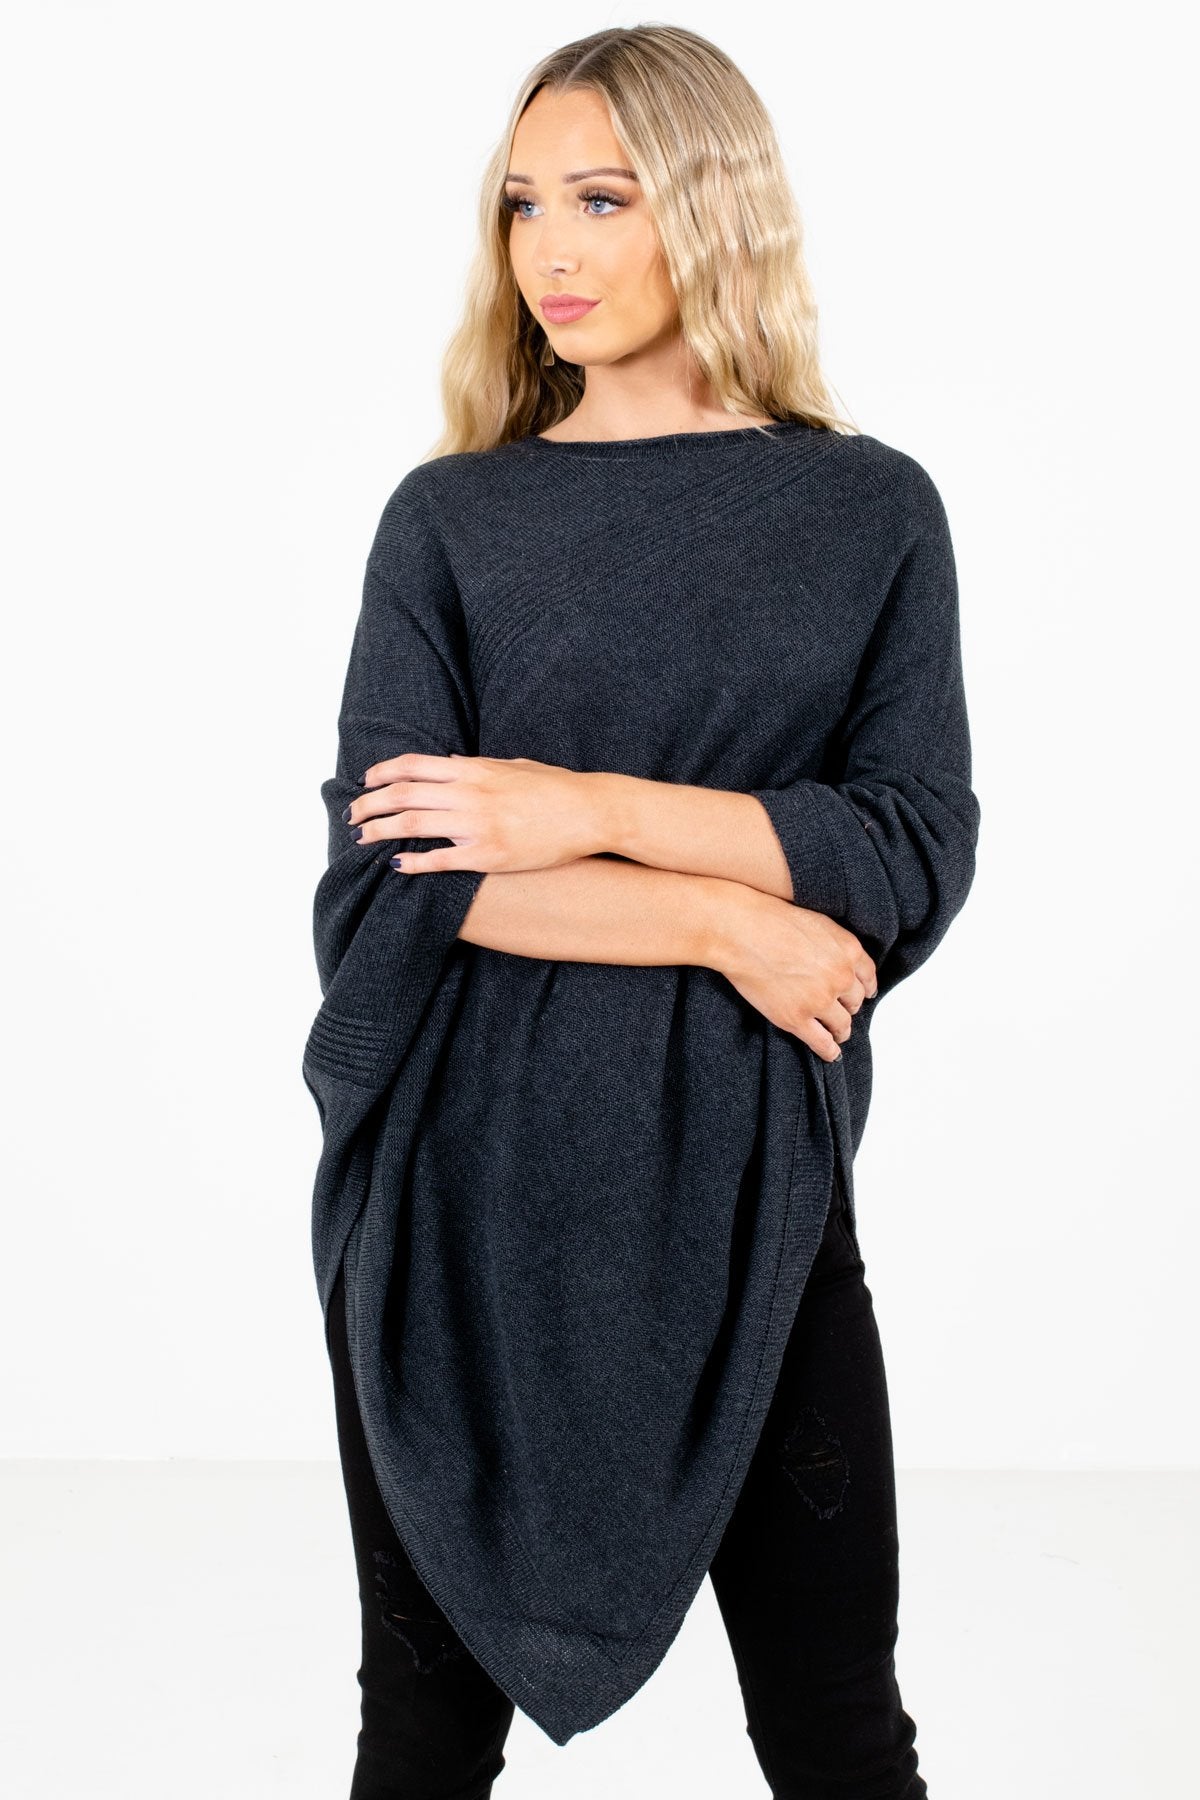 Charcoal Gray Cute and Comfortable Boutique Poncho Sweaters for Women